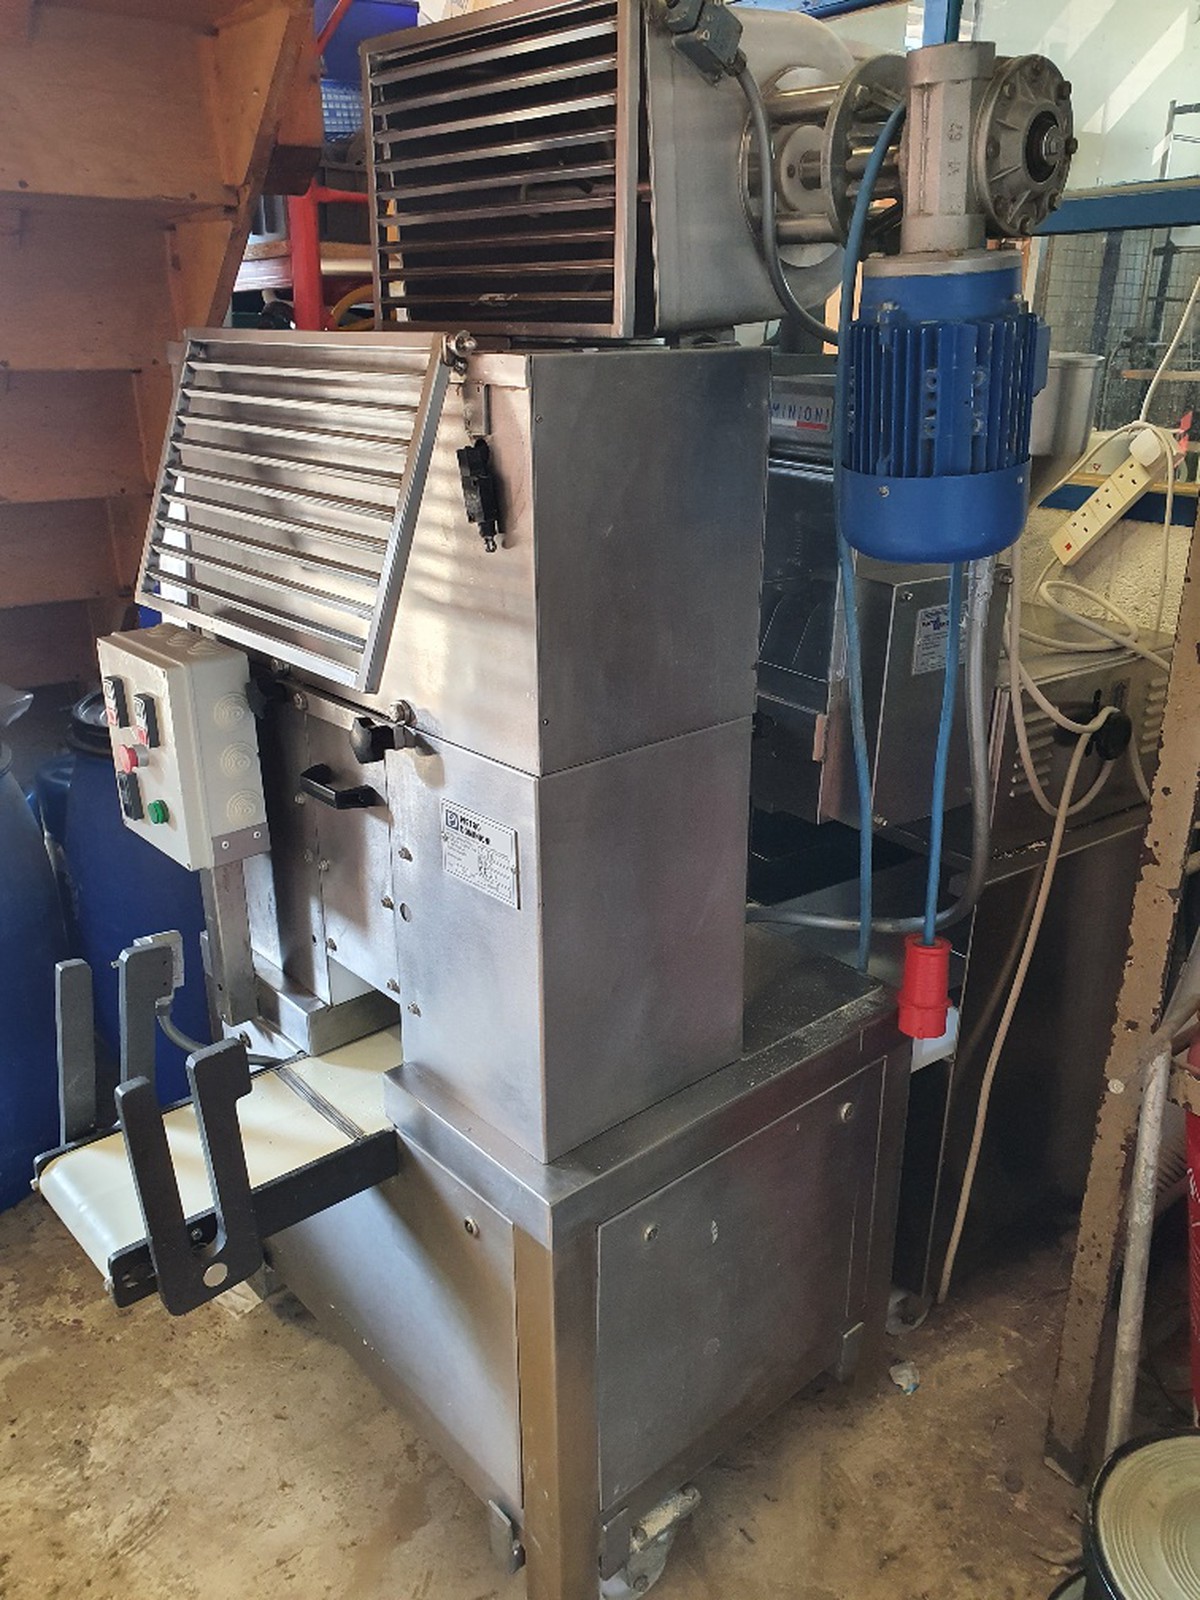 https://for-sale.used-secondhand.co.uk/media/used/secondhand/images/62971/large-selection-of-pasta-making-equipment-hampshire/1200/pietro-dominioni-a160-for-sale-269.jpg